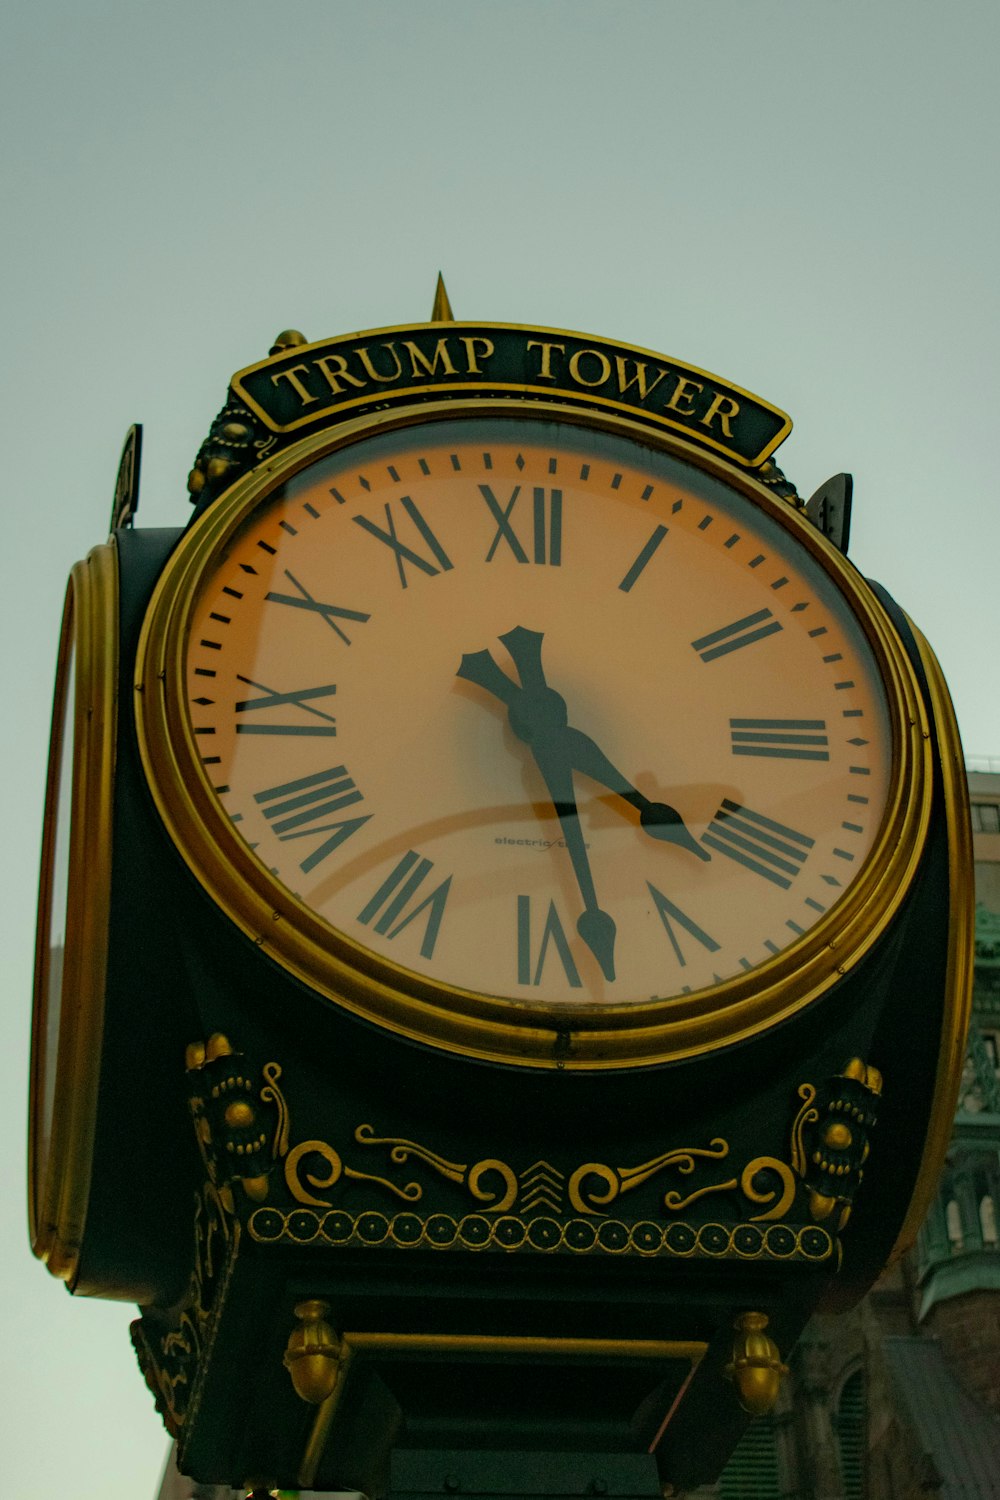 a gold and black clock with roman numerals